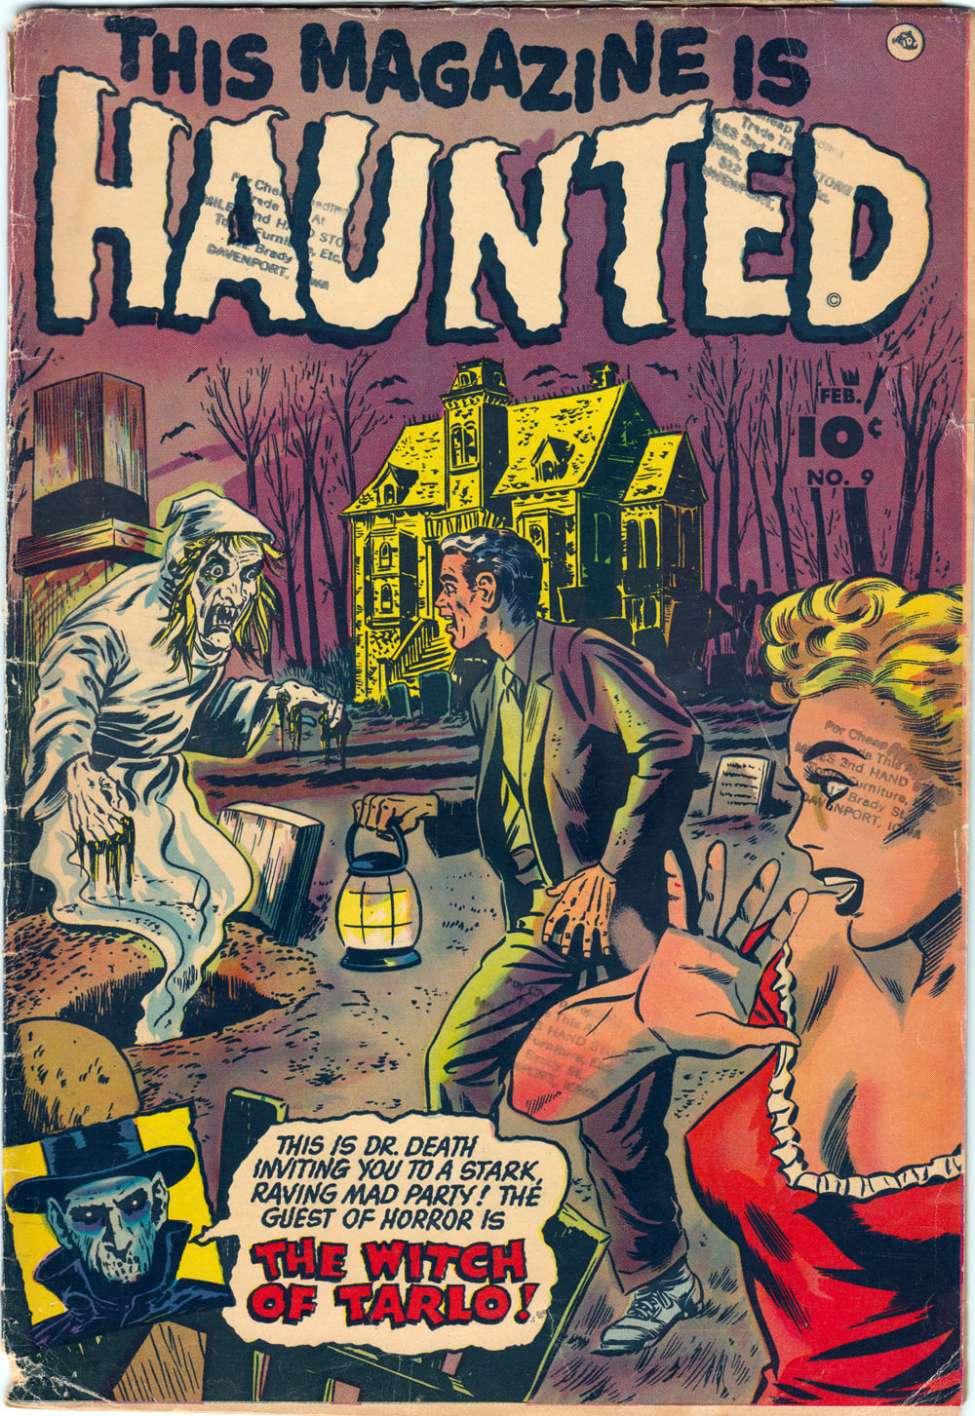 Comic Book Cover For This Magazine Is Haunted 9